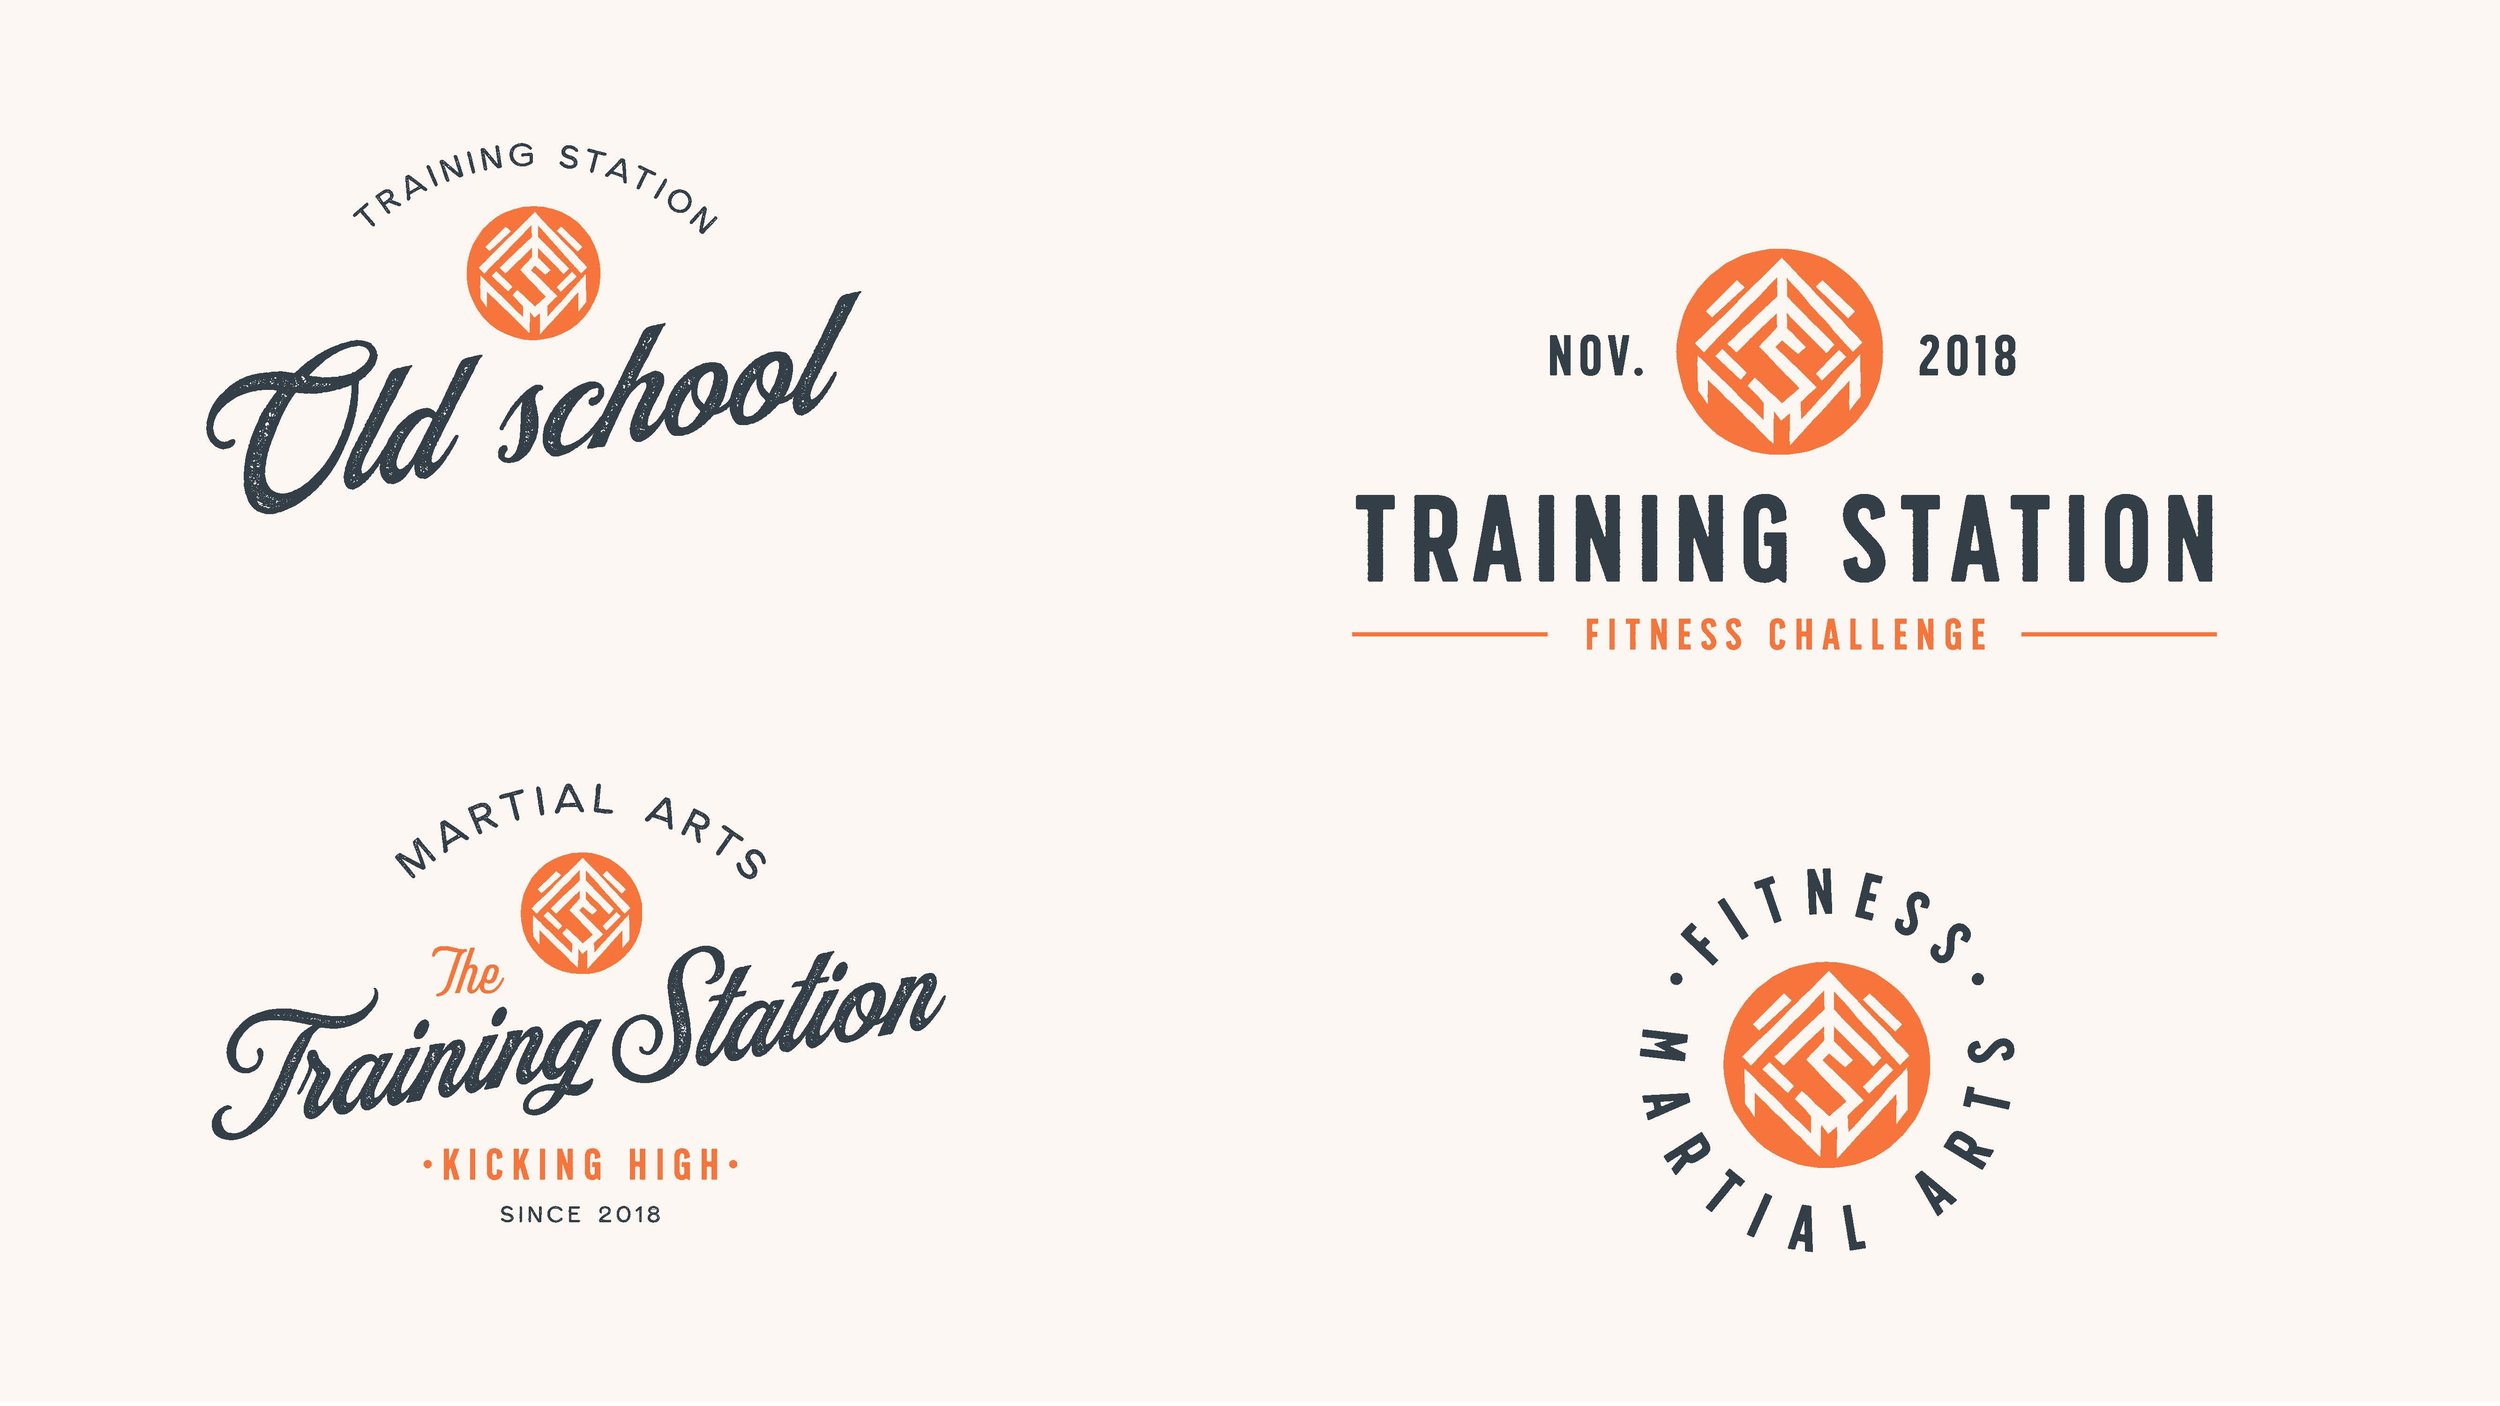 training station_guidelines_Page_2.jpg